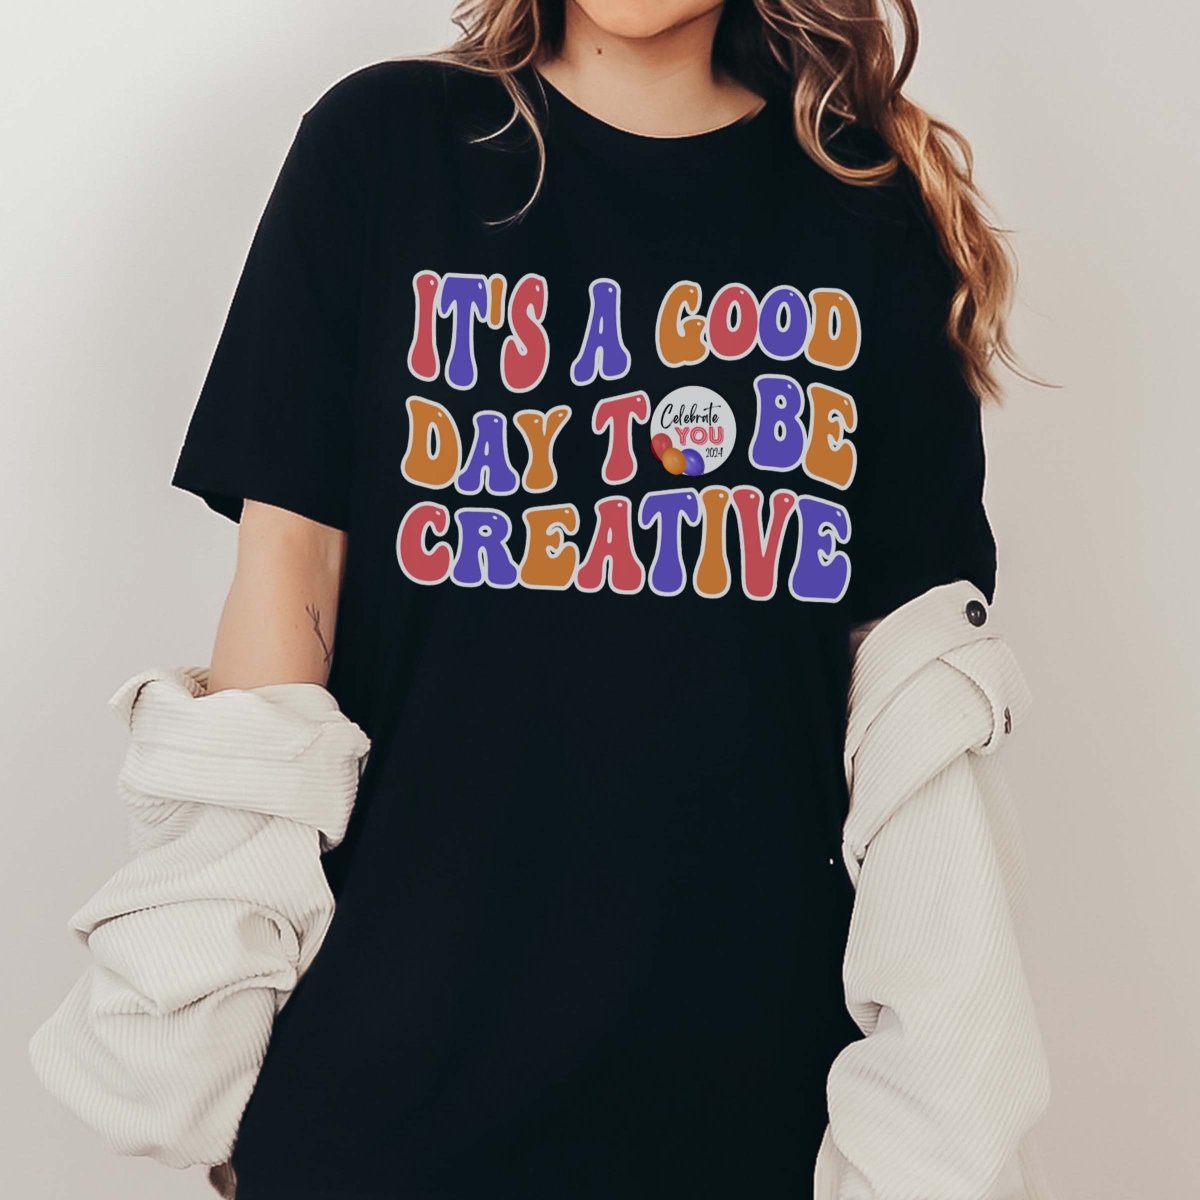 It's A Good Day To Be Creative Tee - Limeberry Designs